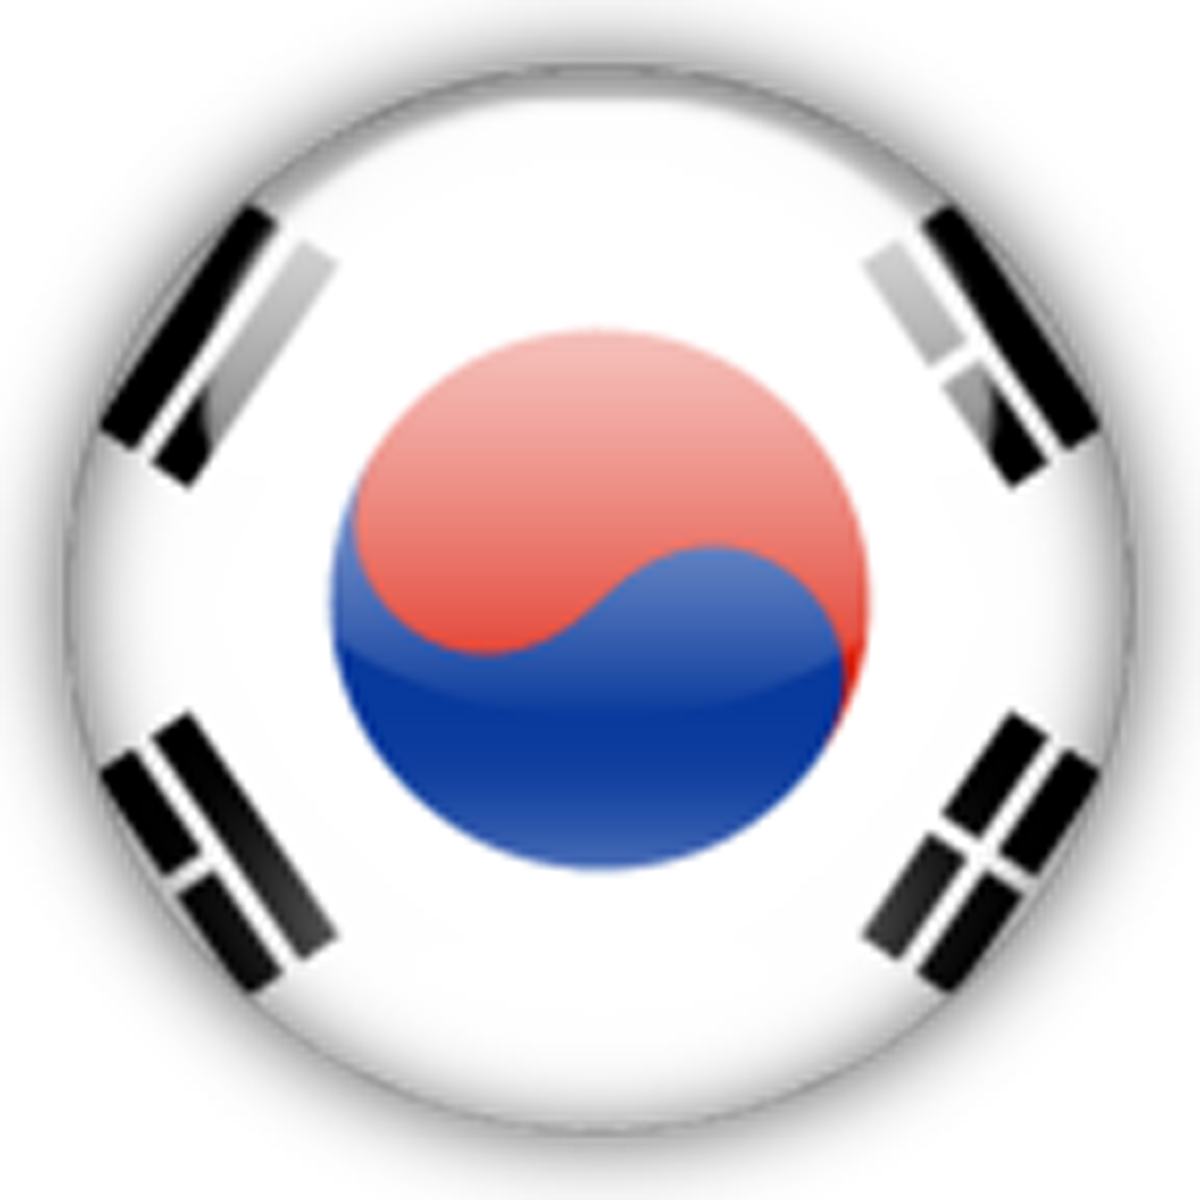 Crystal Glossy Graphic Flag Wallpaper Of South Korea